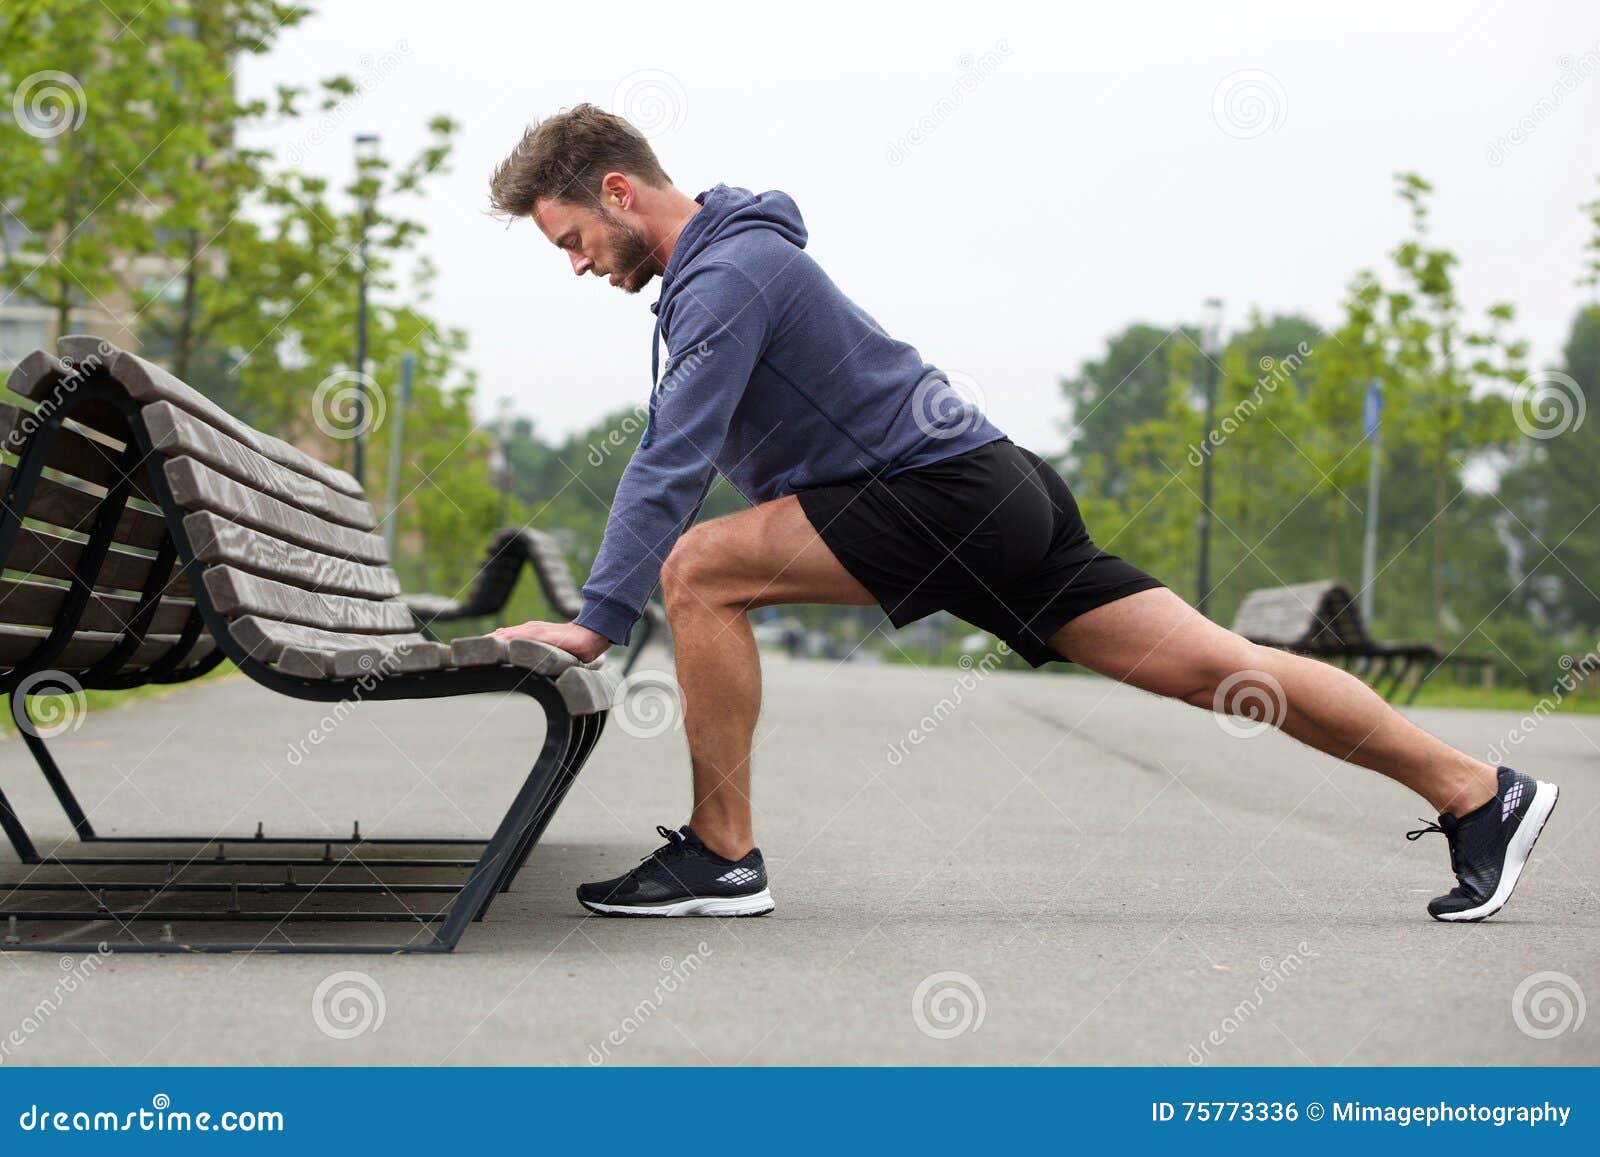 healthy man doing stretch before jog